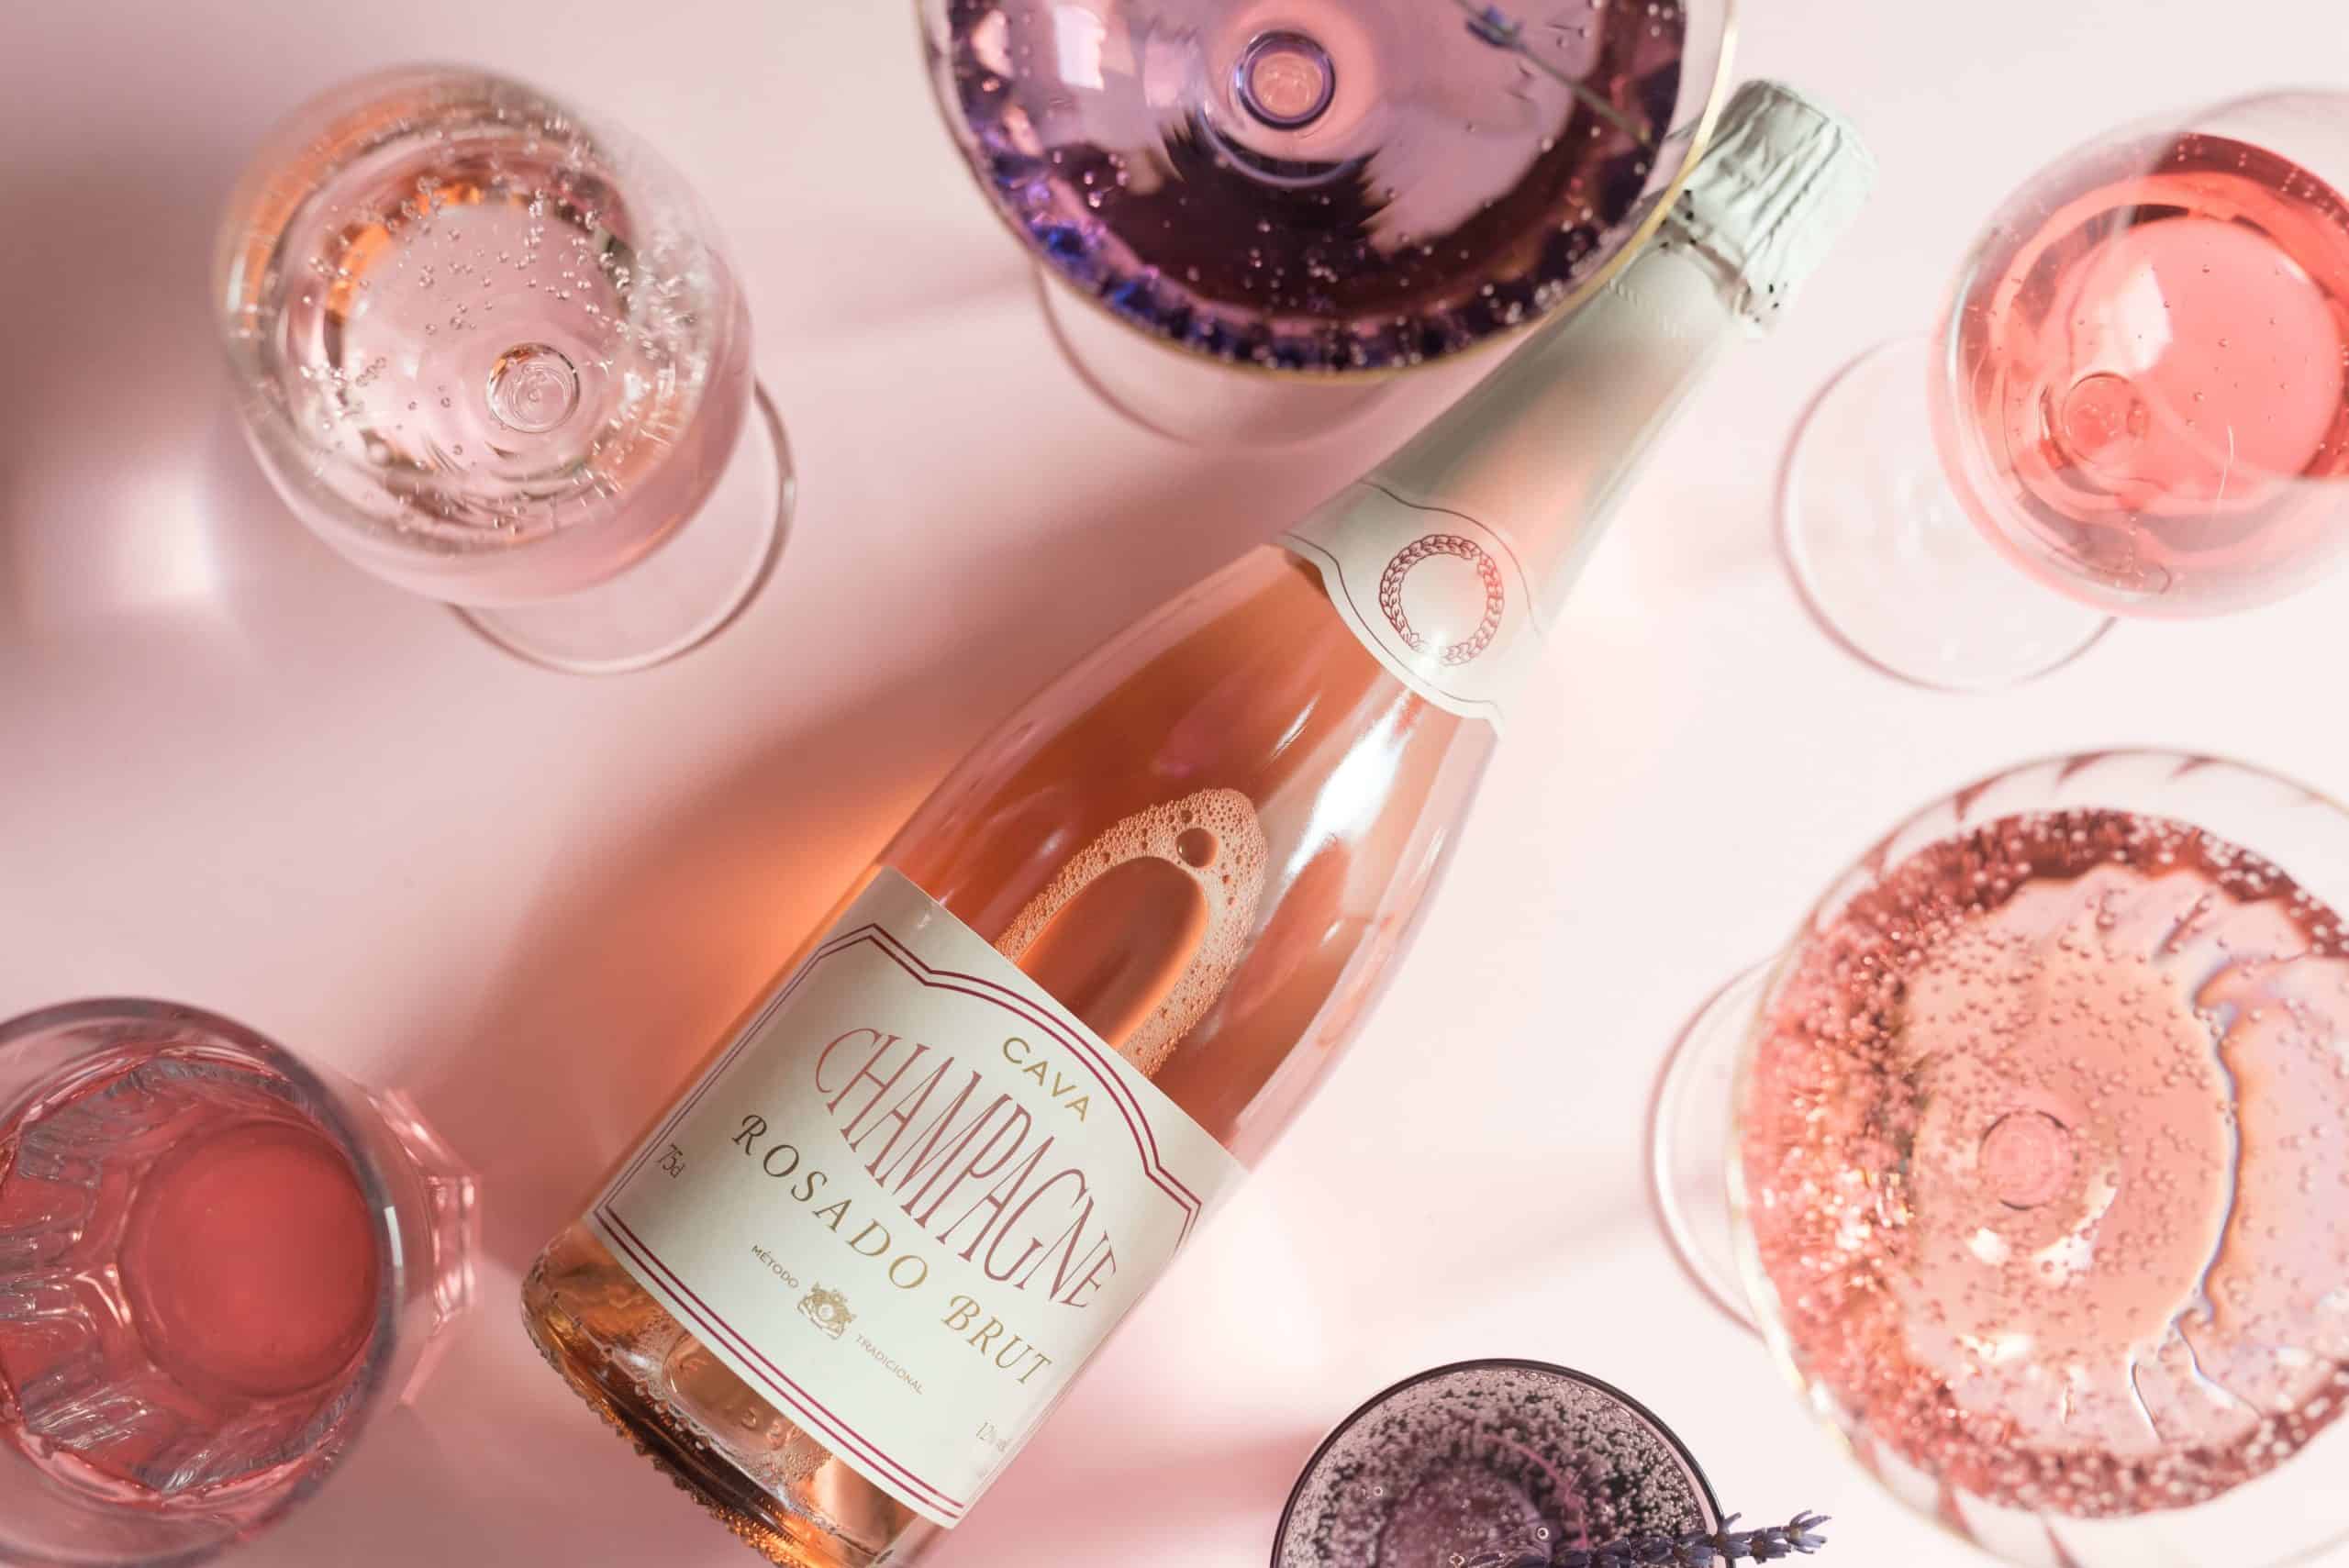 rose champagne as a luxury wedding gift ideas 